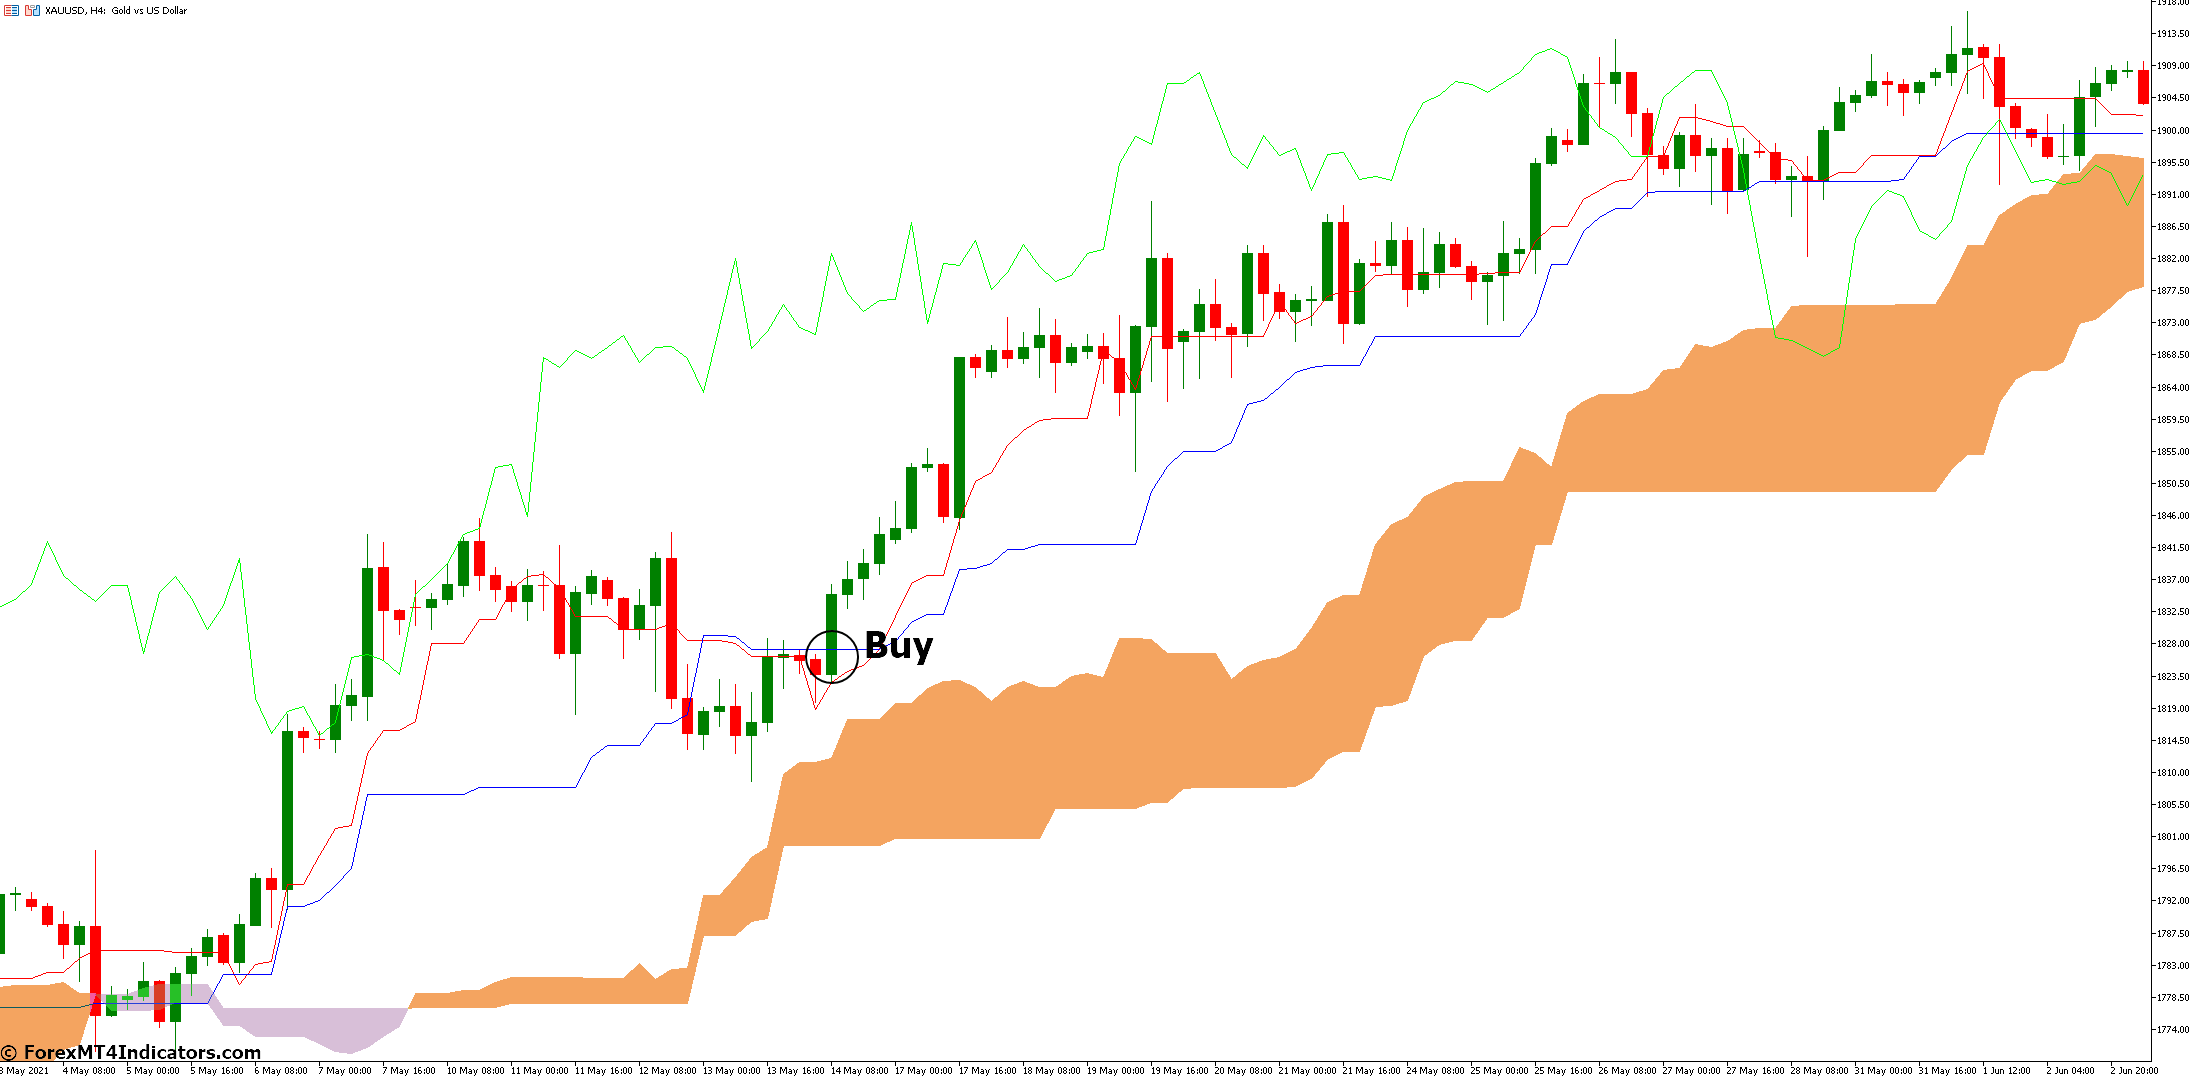 How to Trade with Ichimoku Indicator - Buy Entry